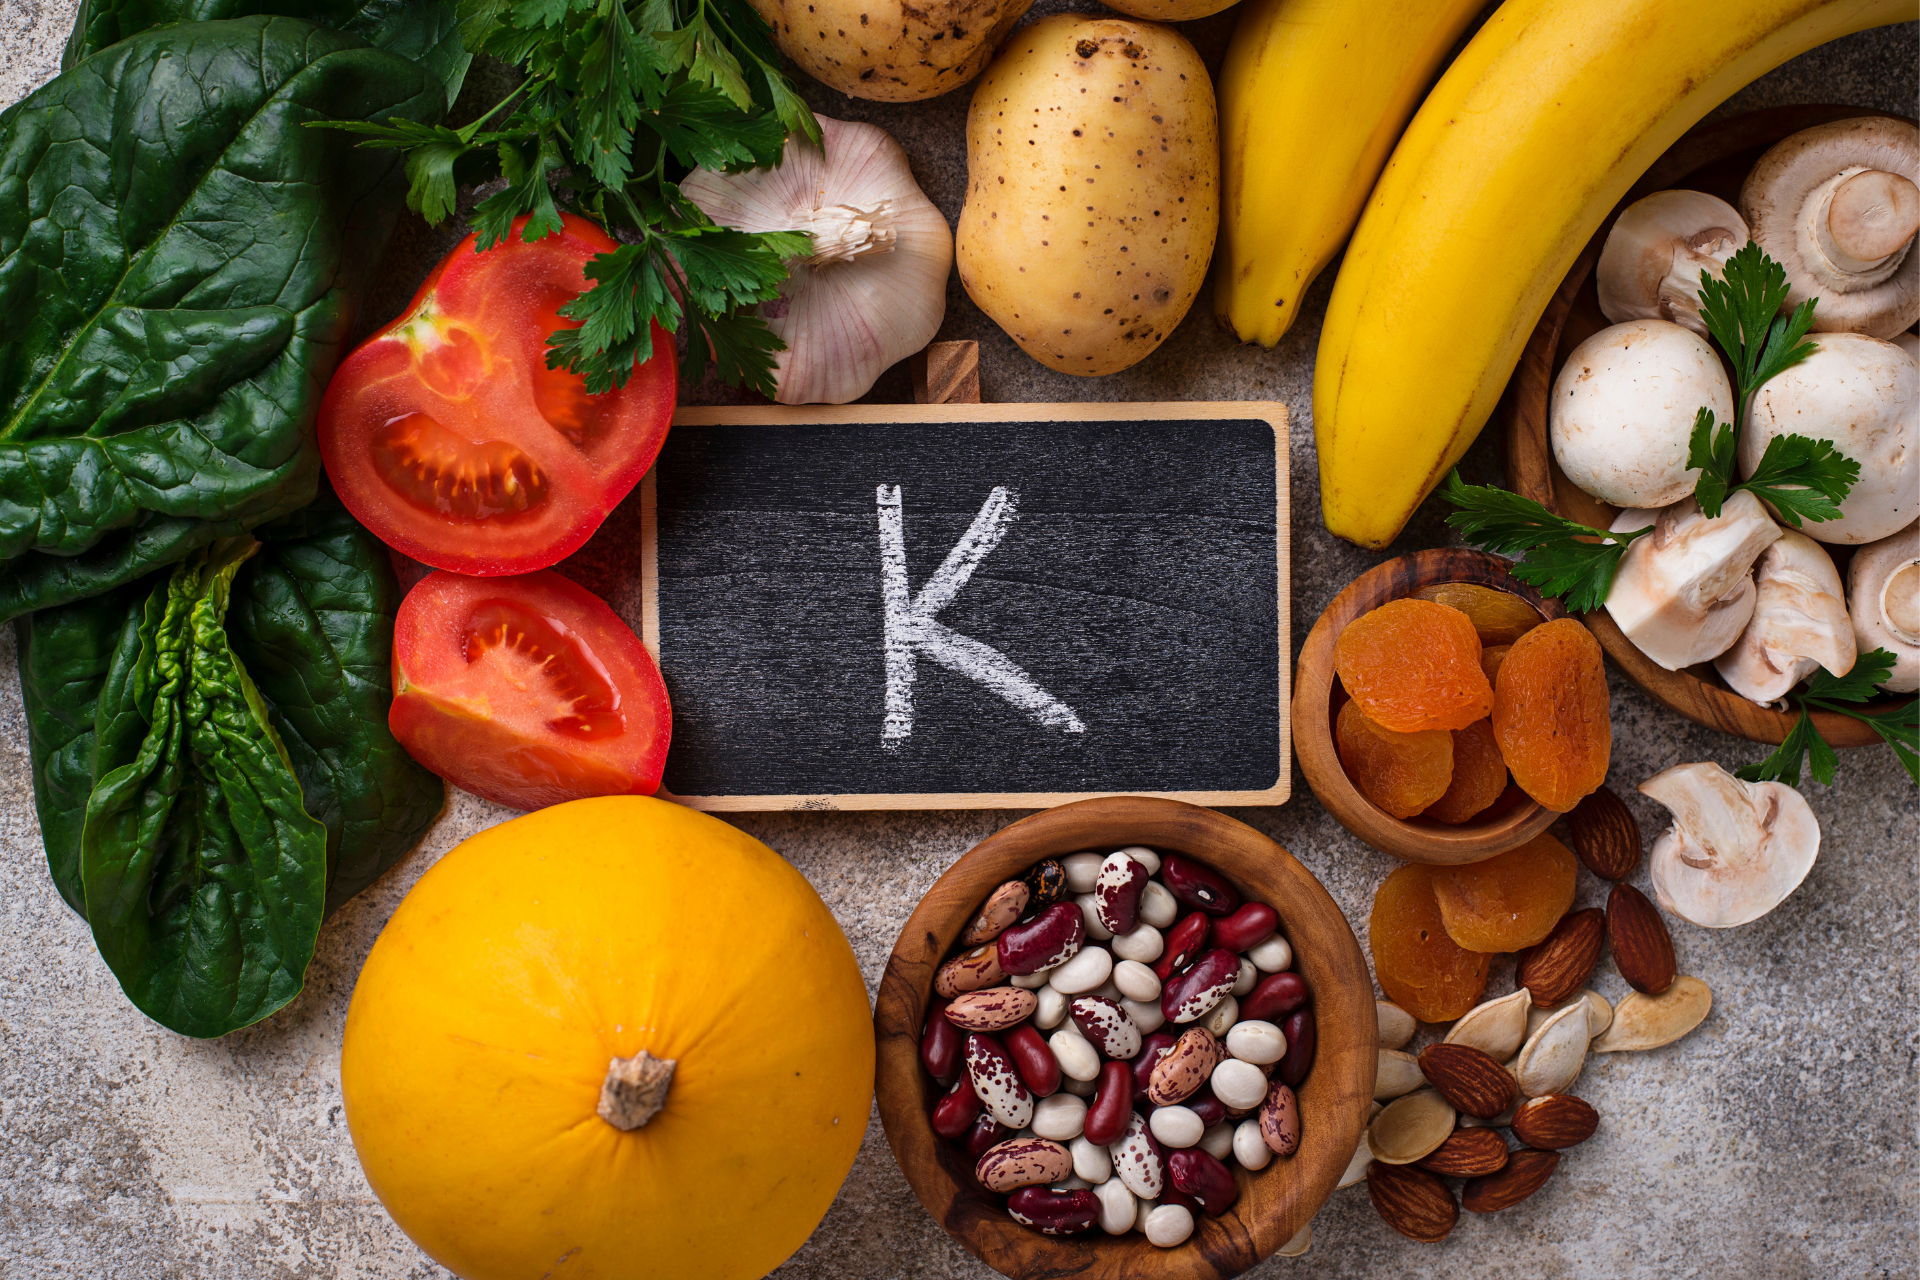 Do you know that vitamin k2 is helpful for calcium supplement?